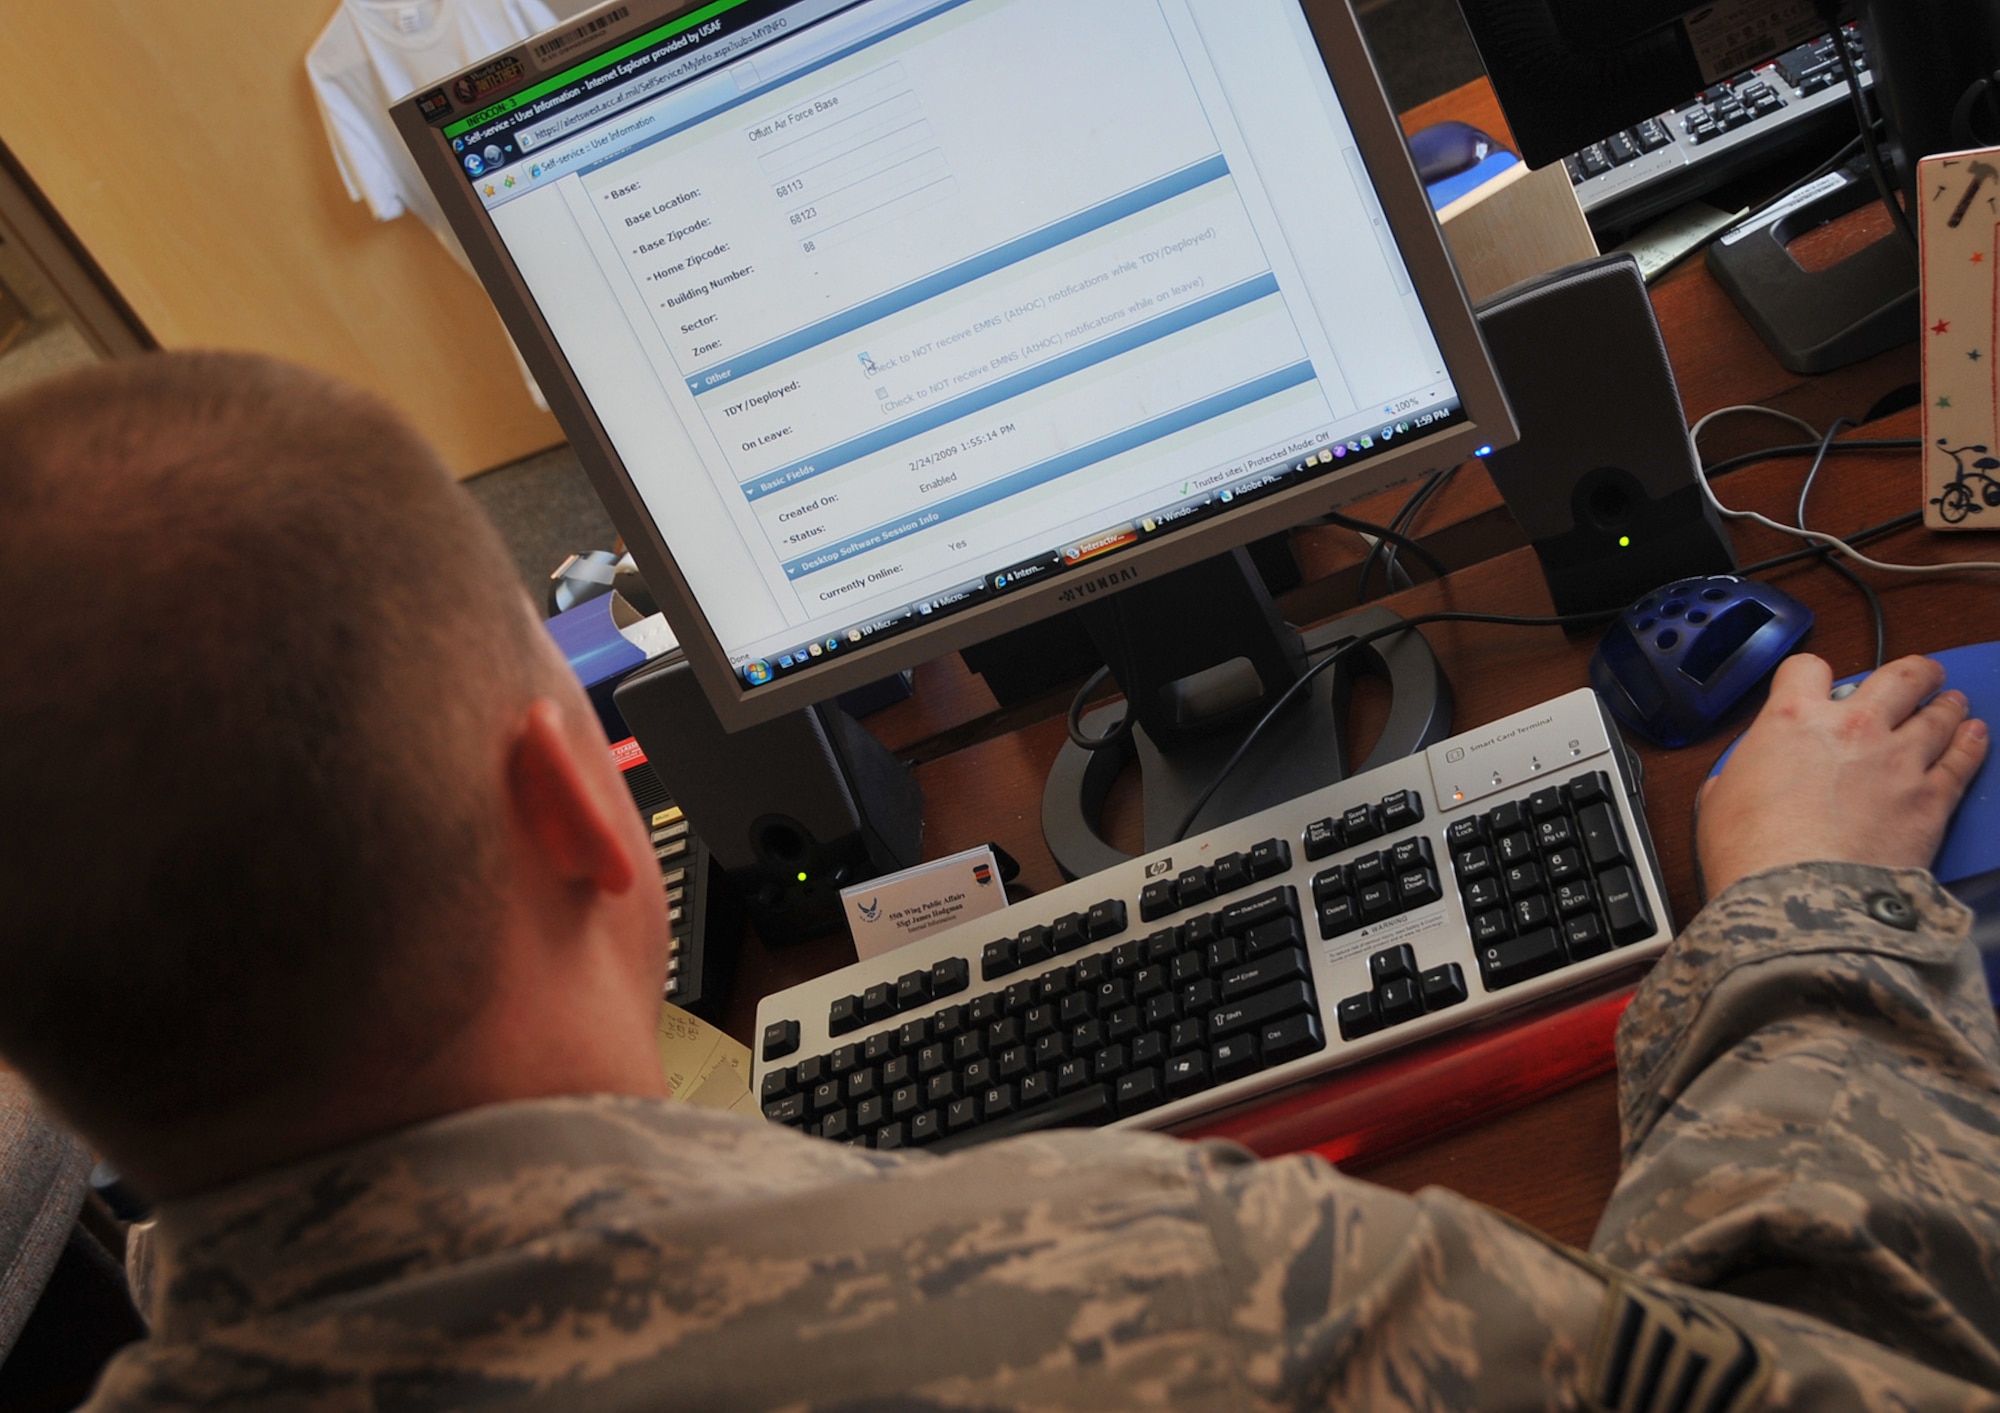 OFFUTT AIR FORCE BASE, Neb. -- Staff Sgt. James M. Hodgman, non-commissioned officer in charge of internal information for the 55th Wing Public Affairs Office, updates his information in the AtHoc emergency notification system. U.S. Air Force Photo by Jeff Gates